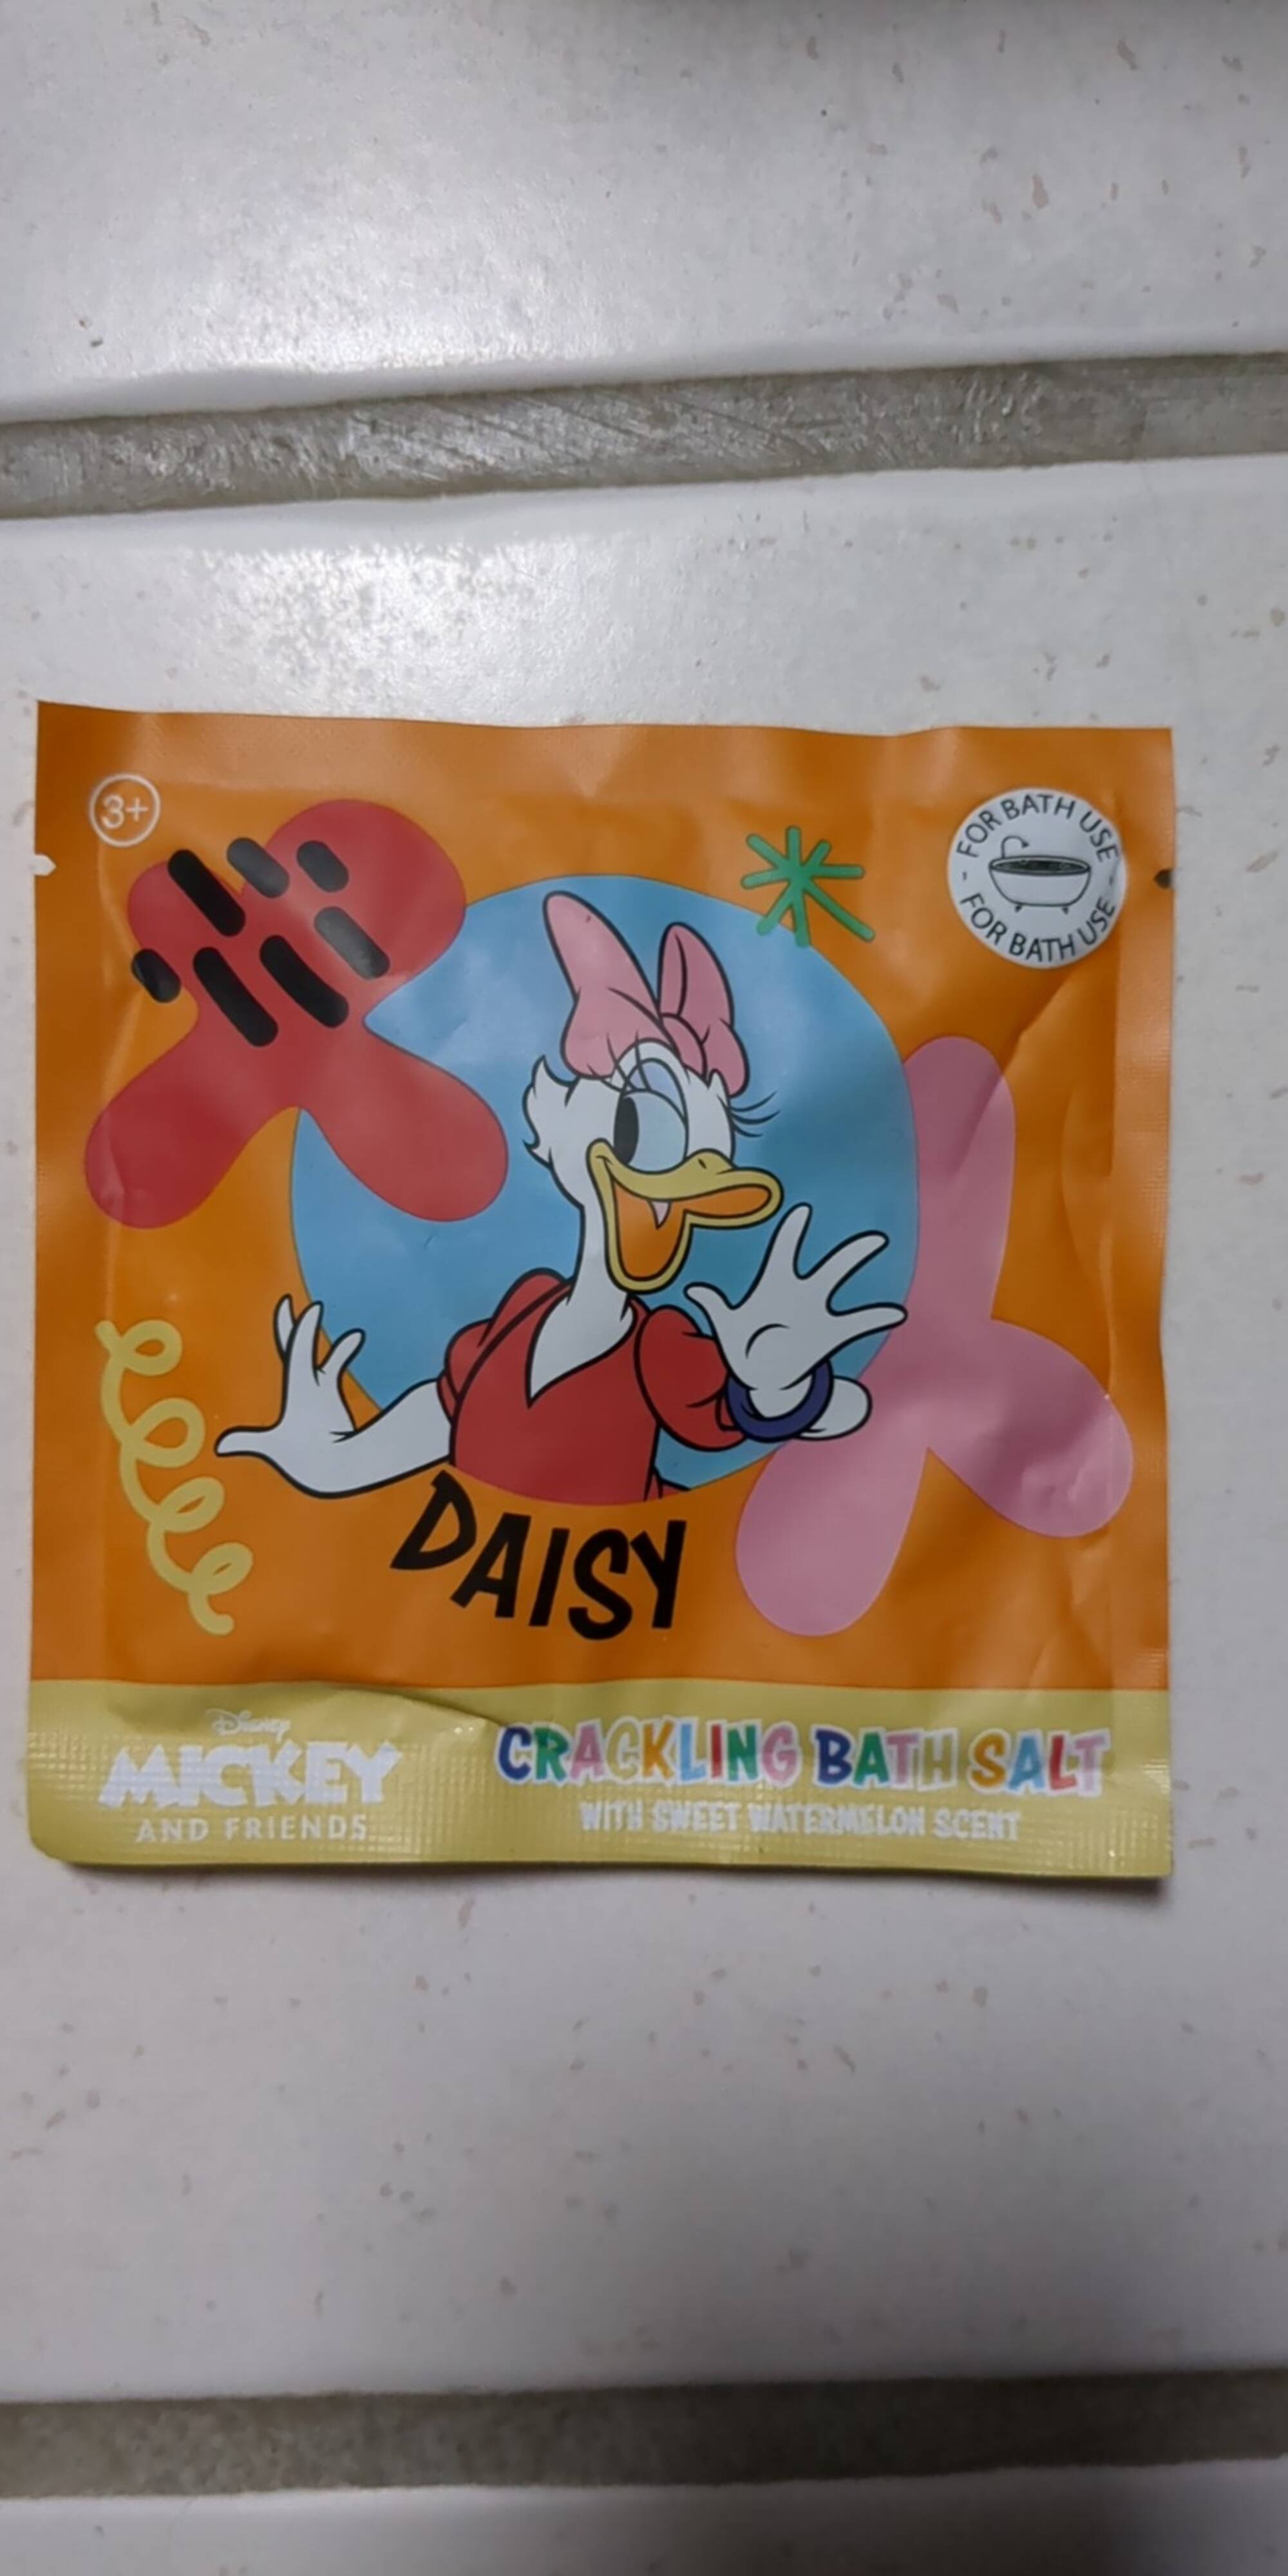 DISNEY MICKEY AND FRIENDS - Daisy - Crackling bath salt with sweet watermelon scent